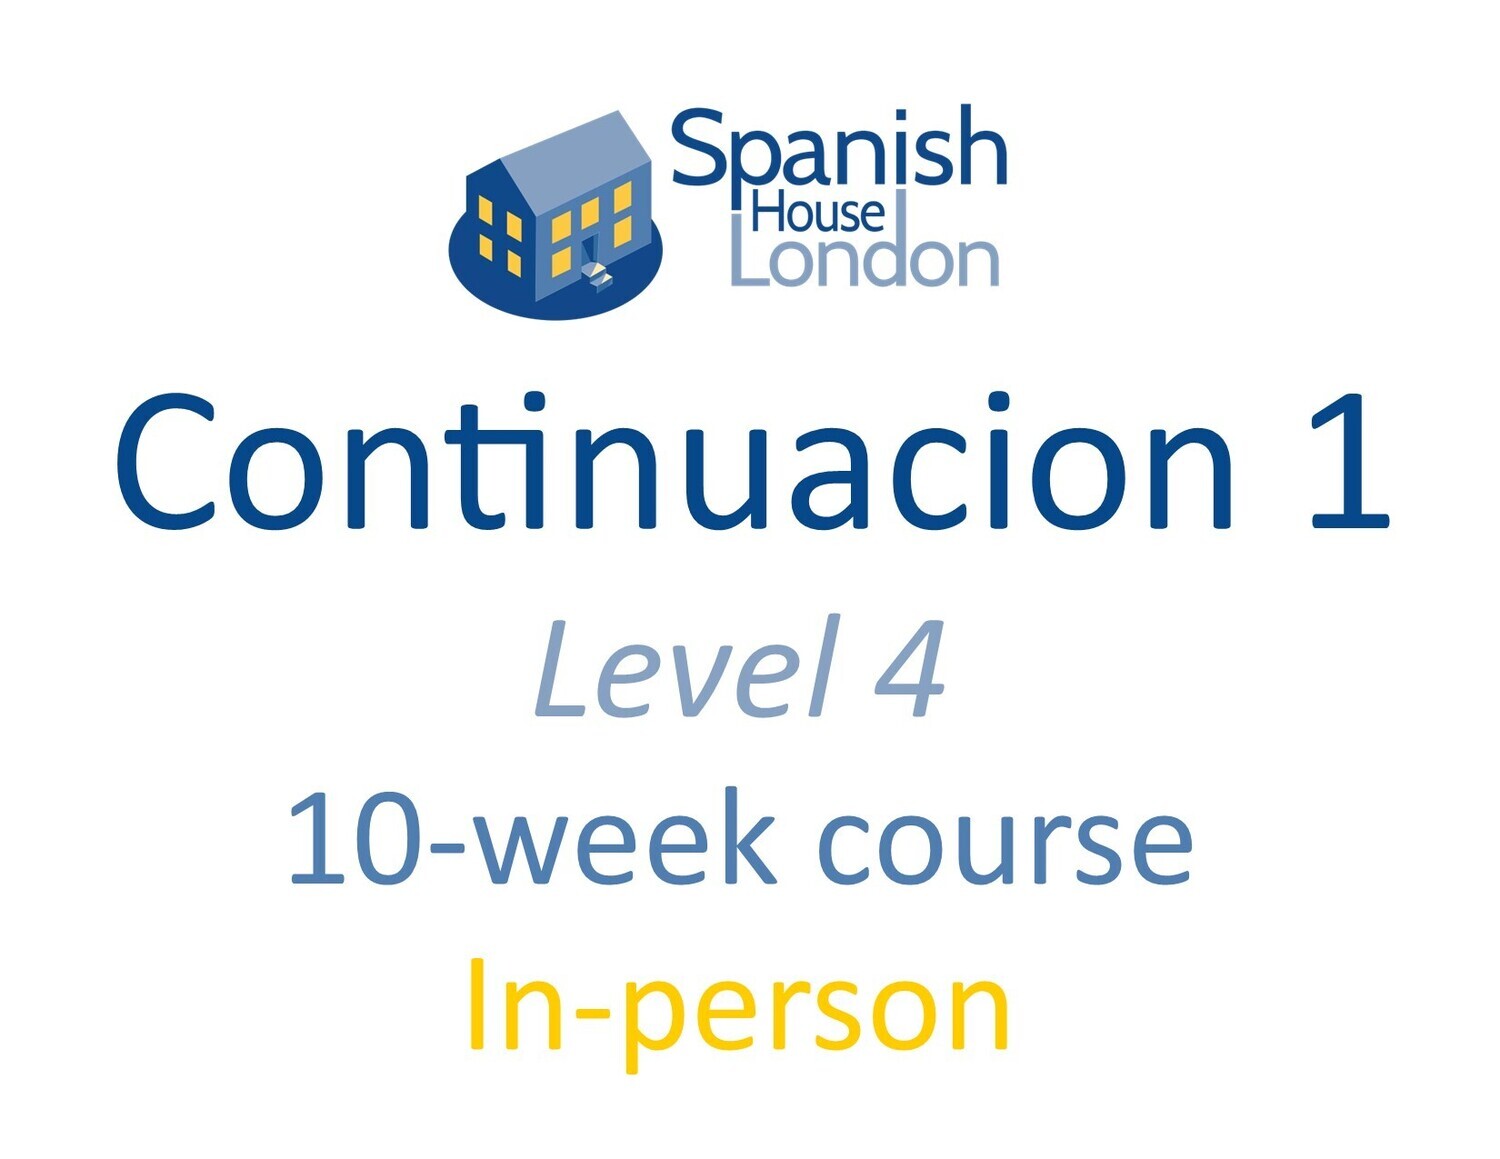 Continuacion 1 Course starting on 19th September at 7.30pm in Clapham North